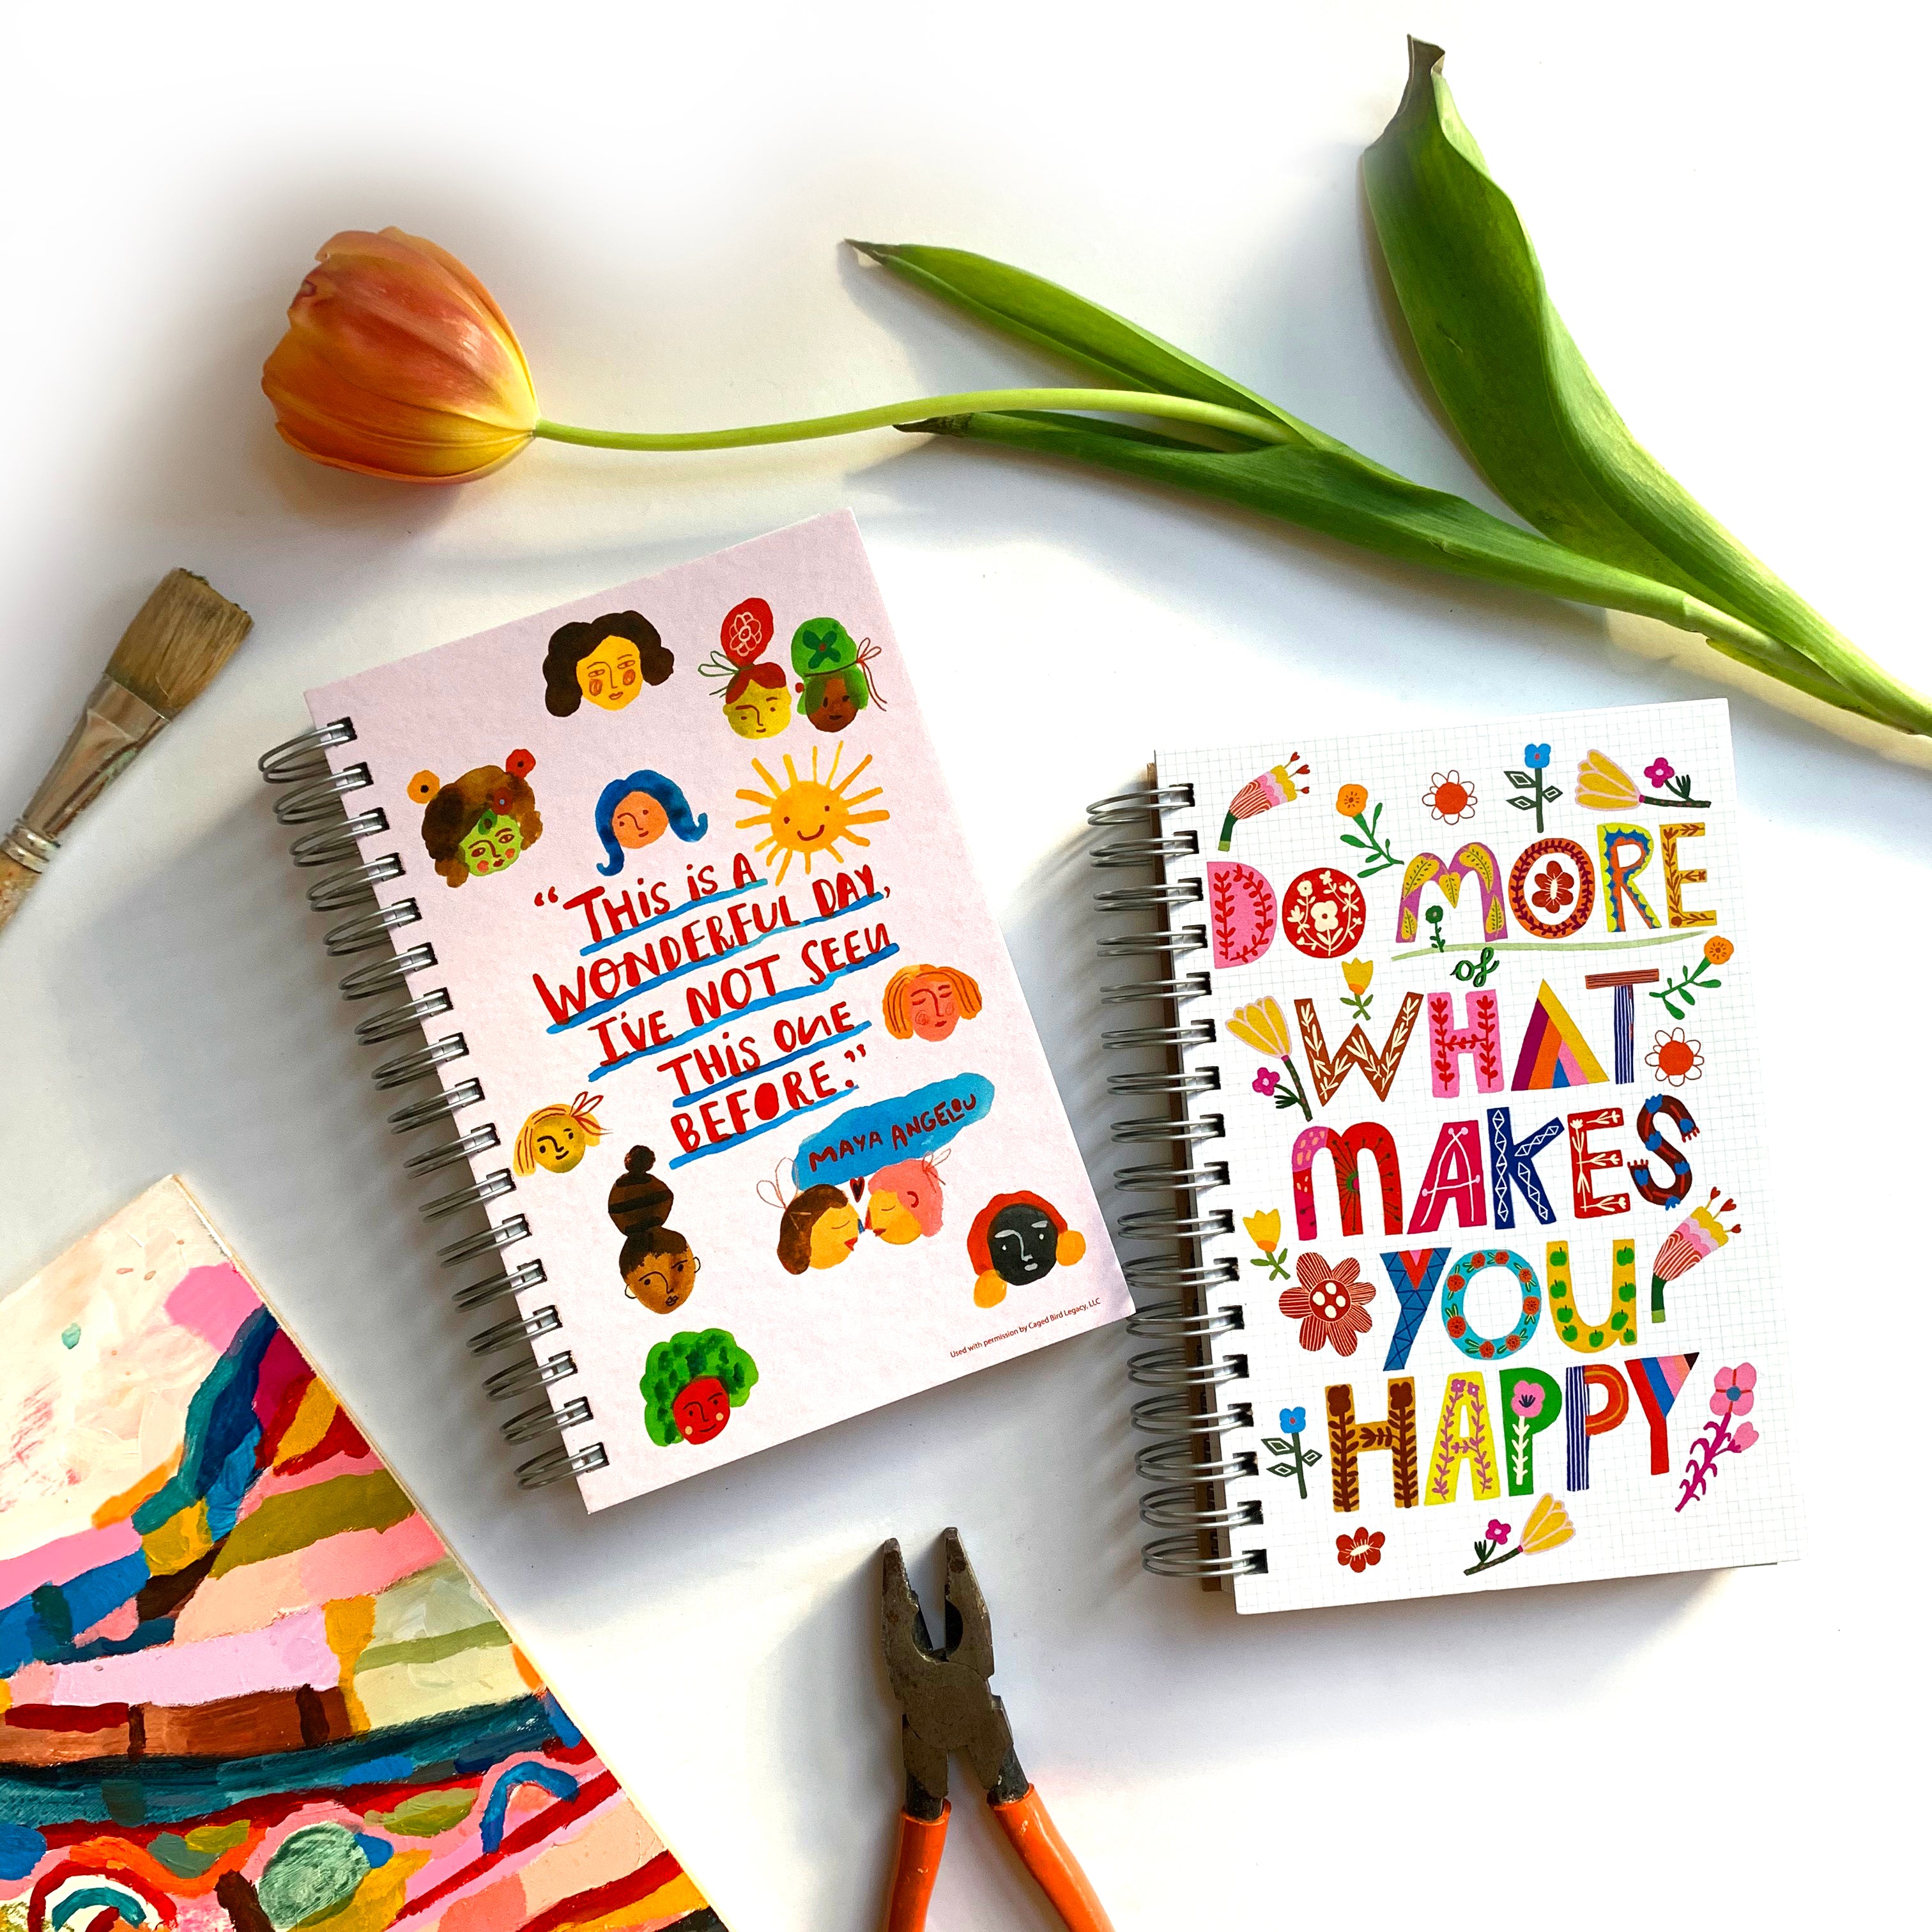 Do more of what makes you happy Jumbo Journal